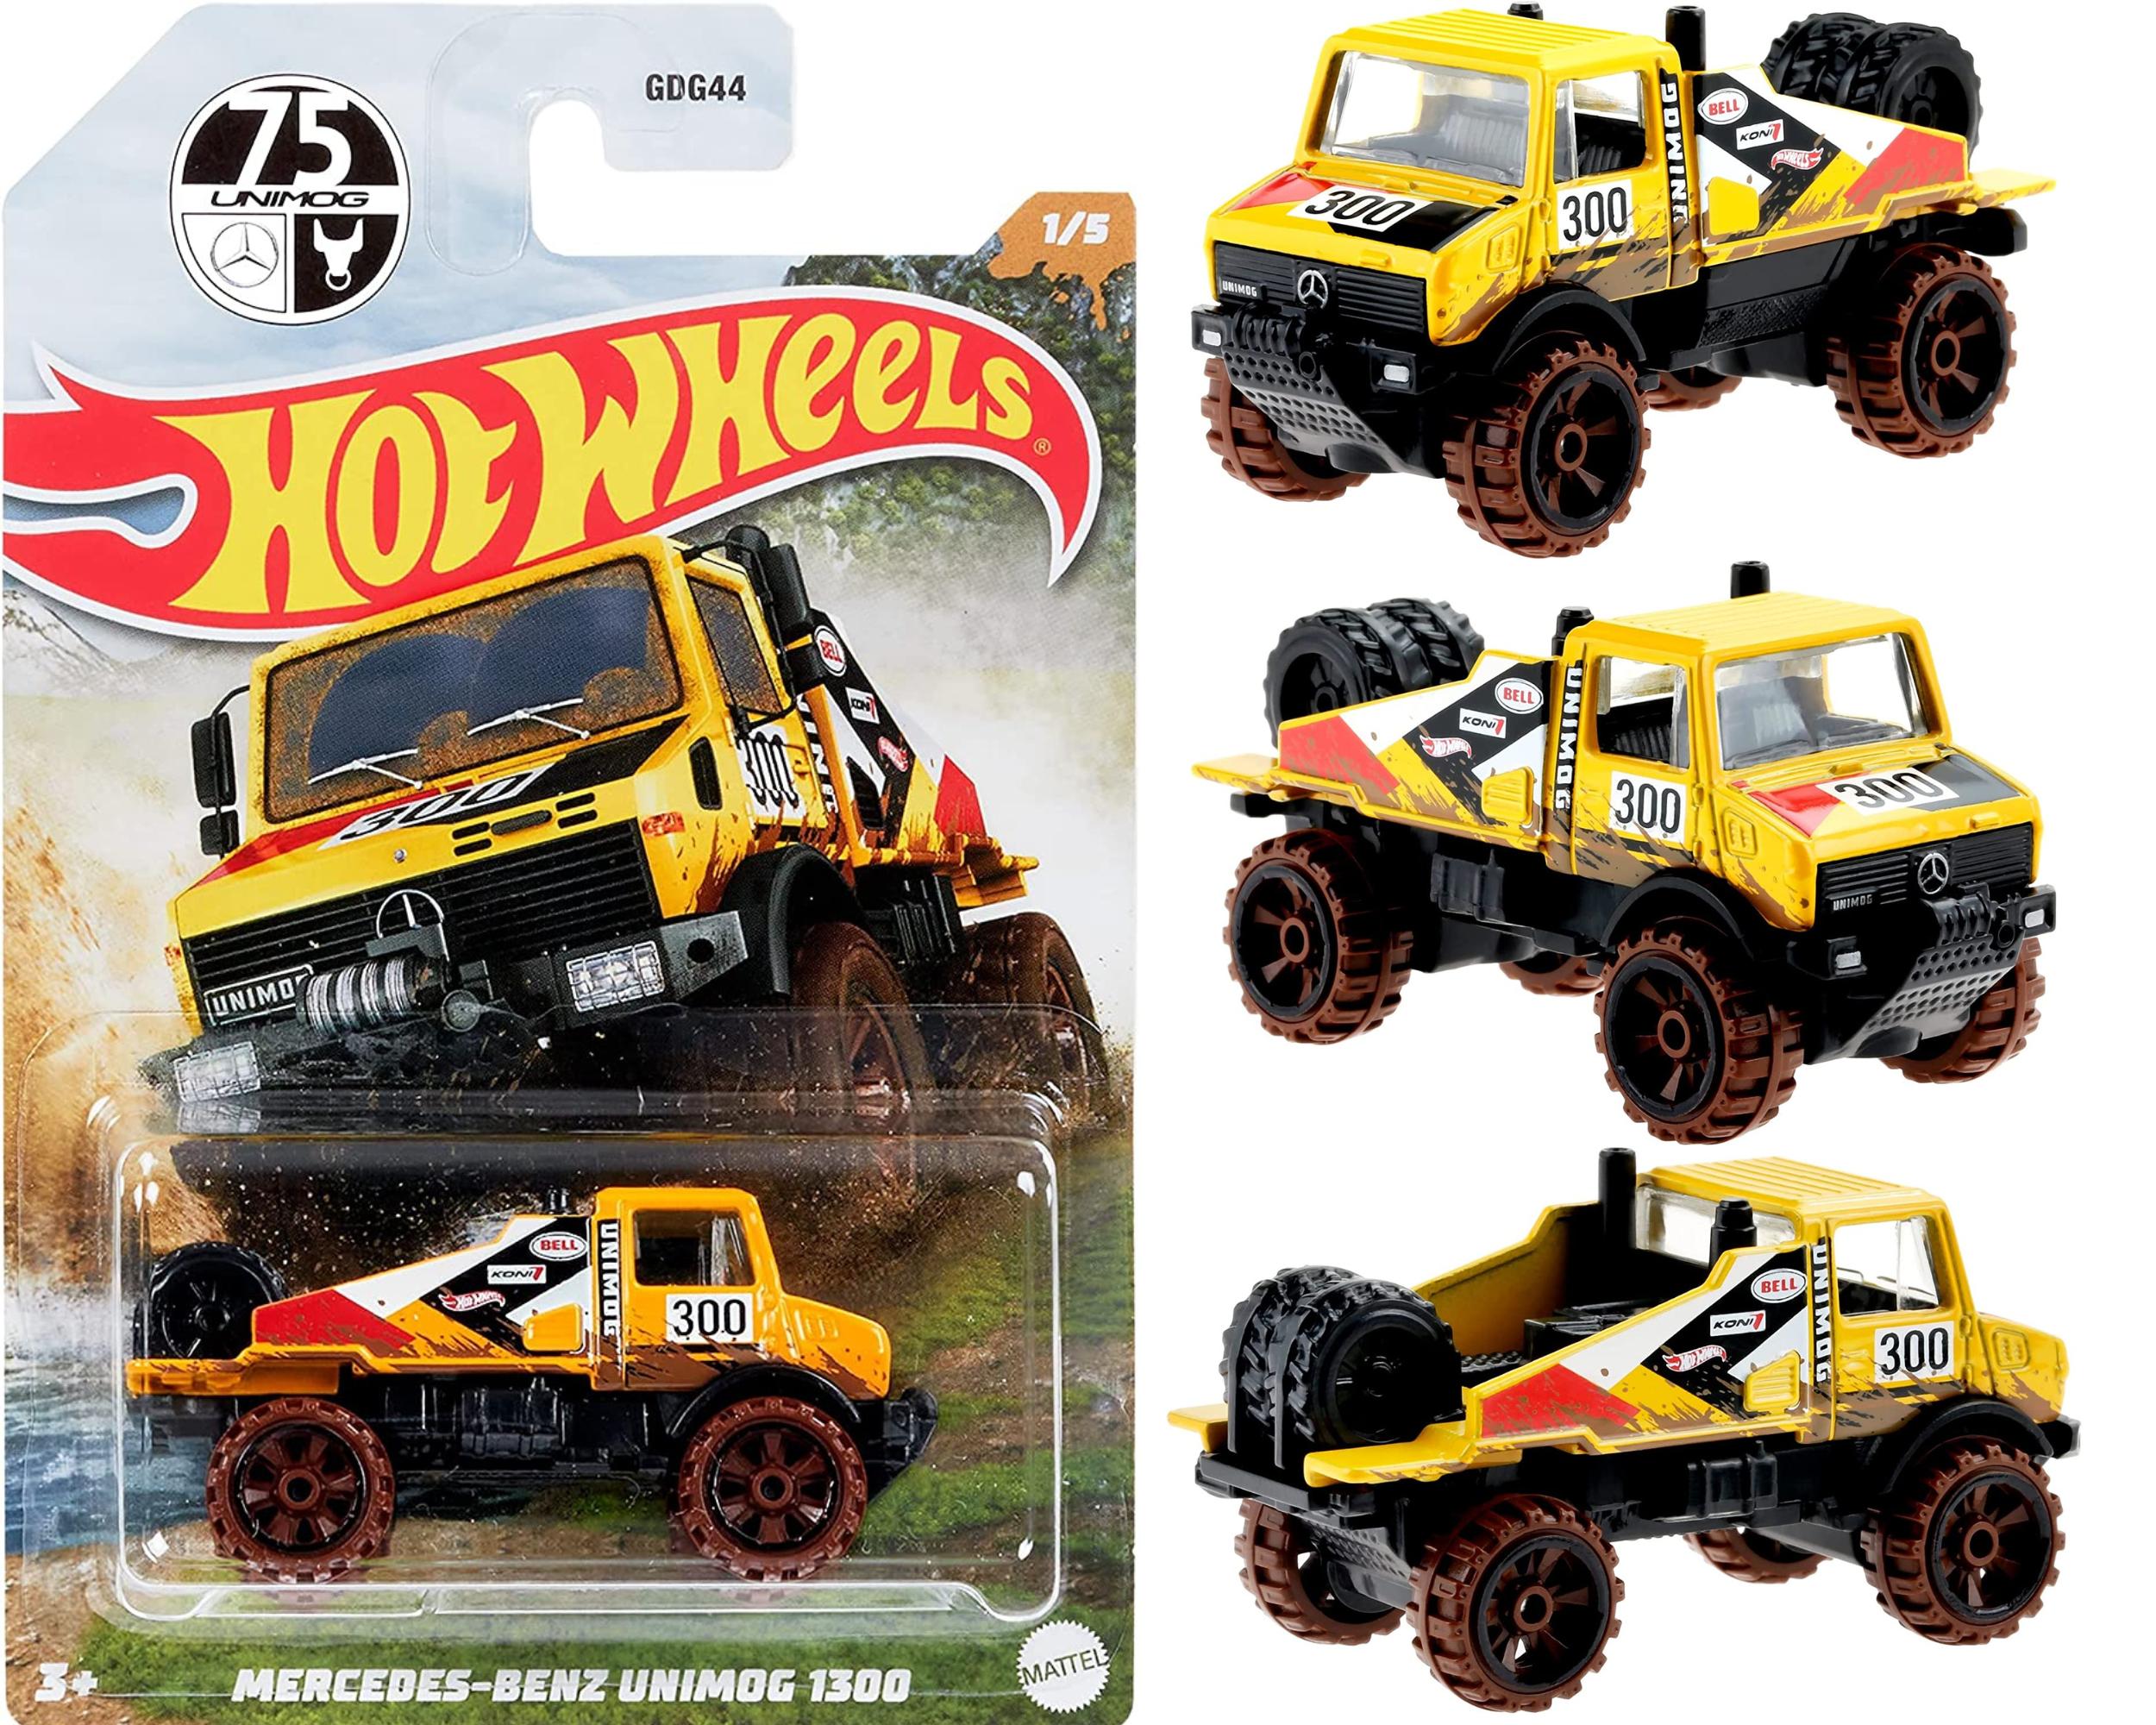 Hot Wheels Mud Runners - 1:64 Scale Diecast - 67 Jeepster Commando, Mercedes Benz Unimog 1300 & Olds 442 W-30 - Set of 3 - Toptoys2u